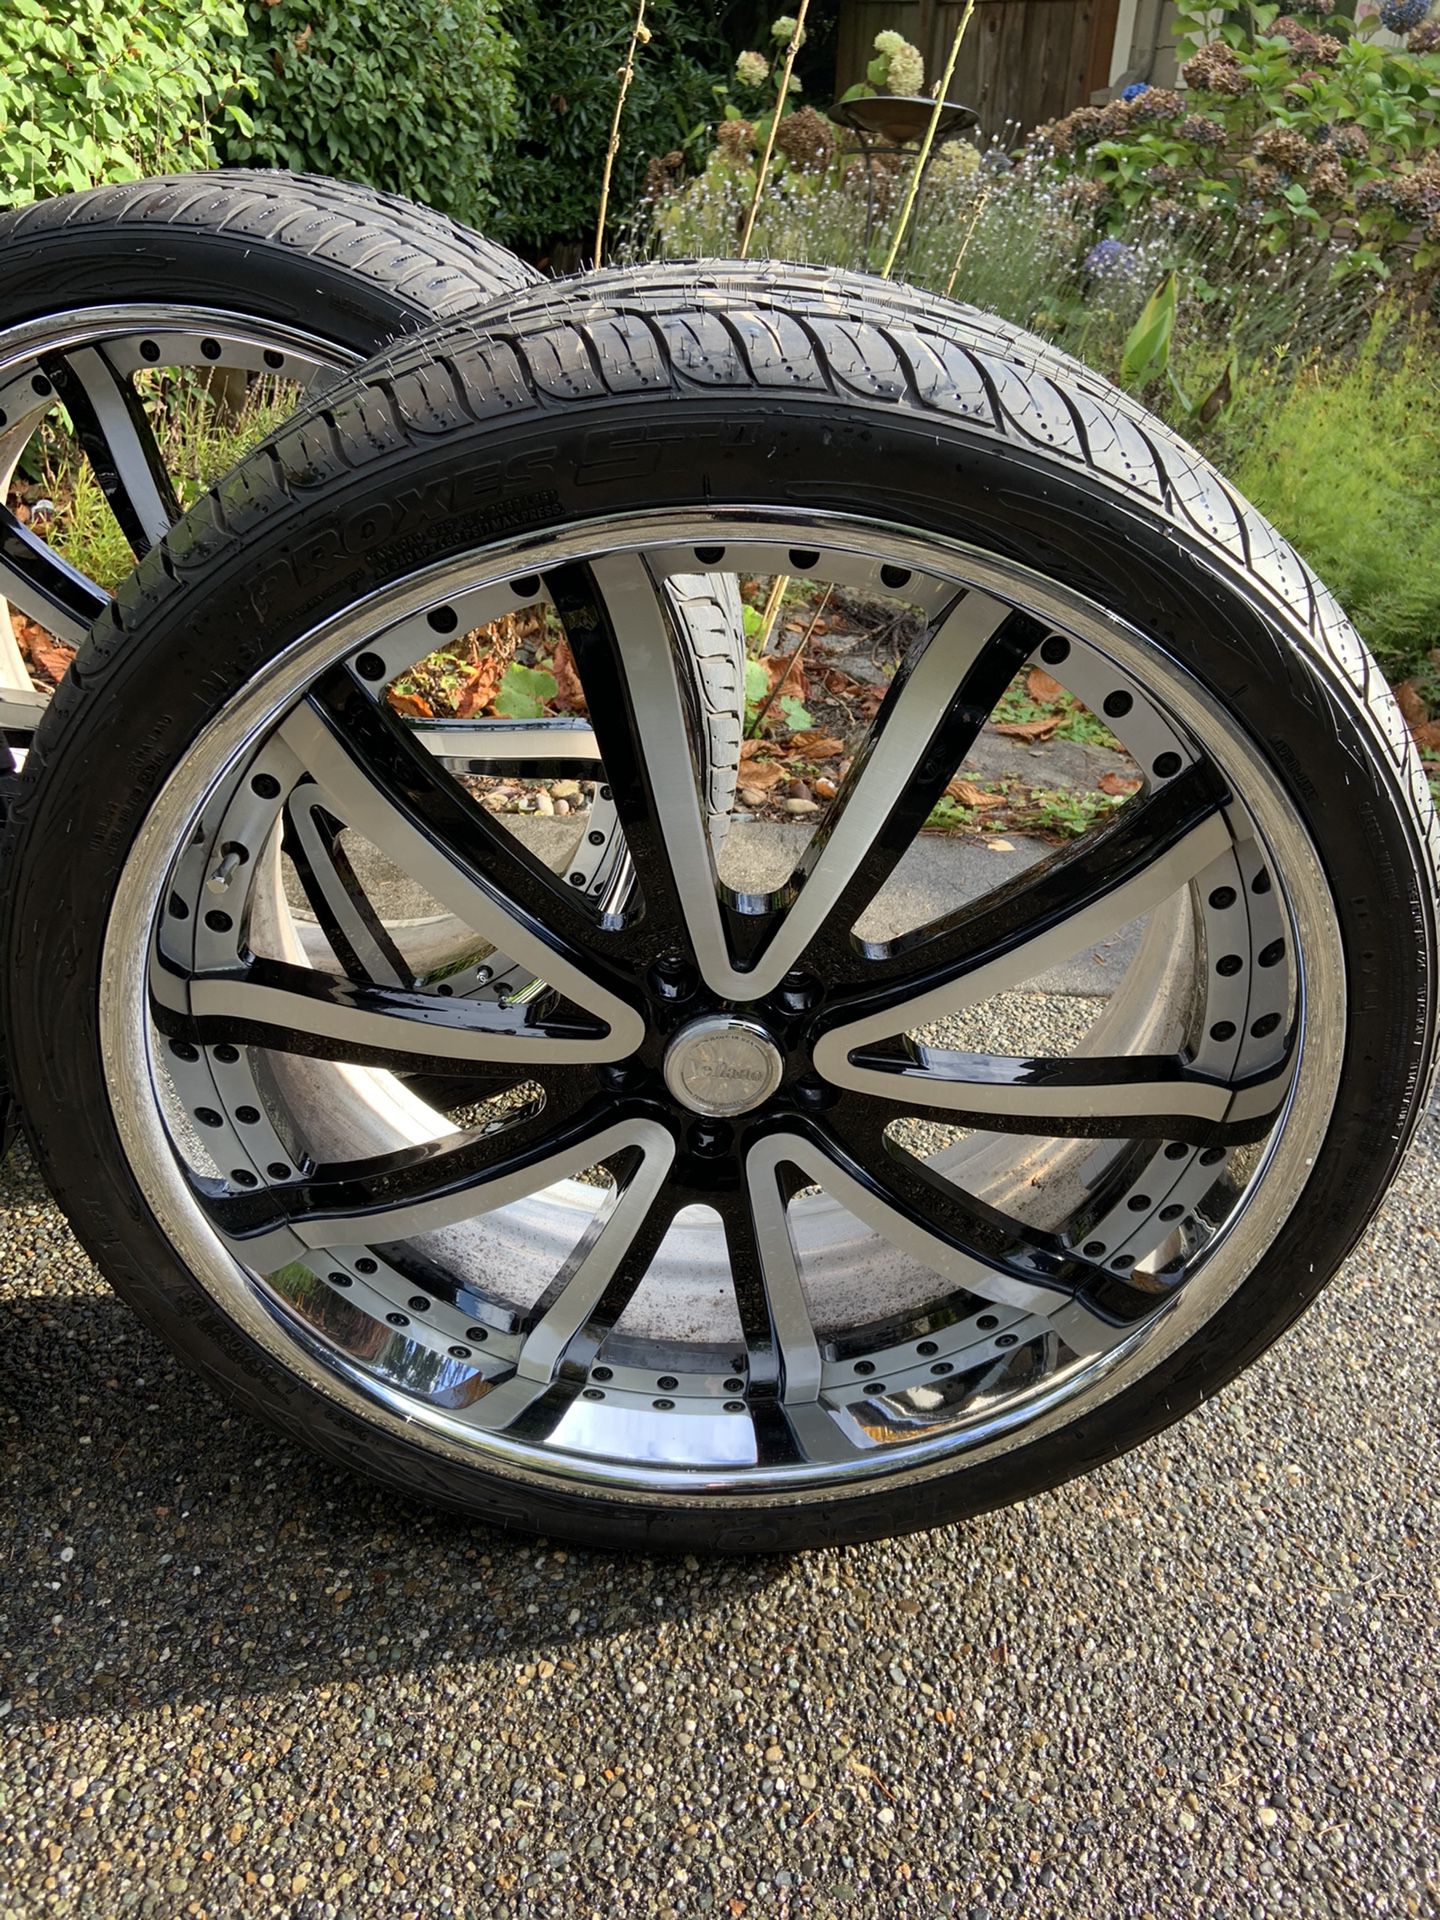 NEW PRICE!! Set of 4 Vellano 24 in rims and Toyo Tires